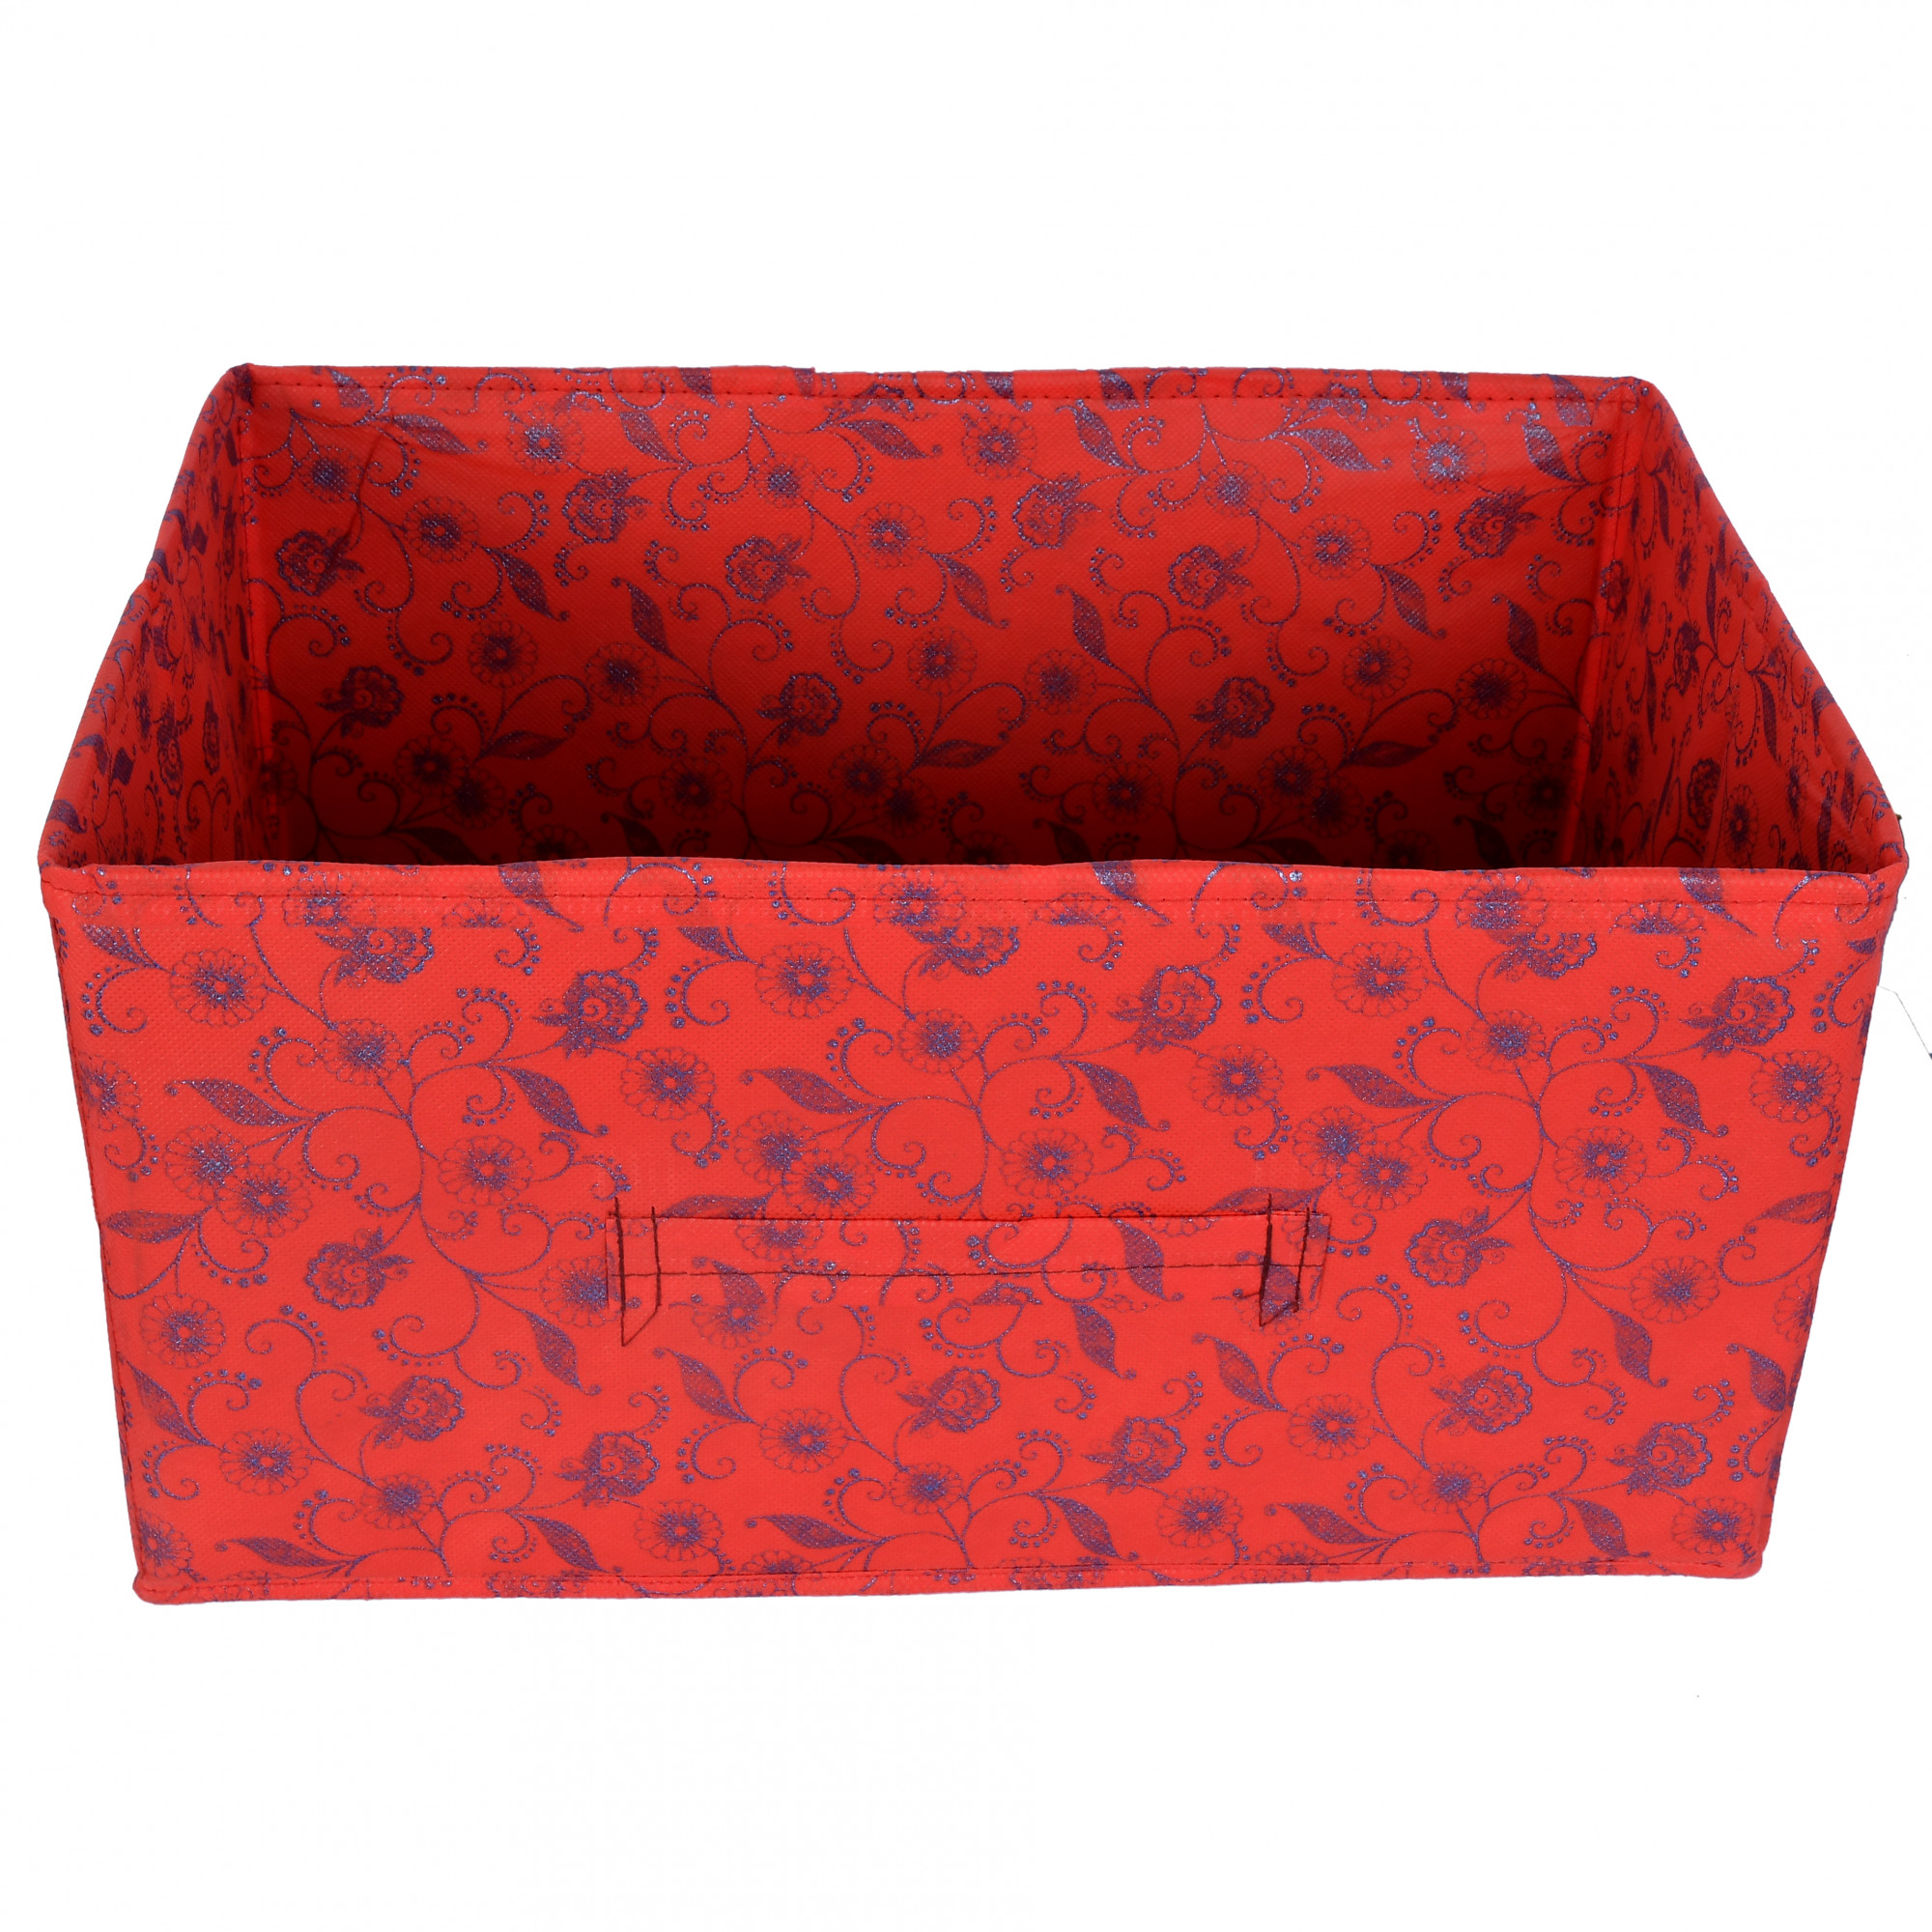 Kuber Industries Metalic Floral Print Non Woven Fabric Drawer Storage And Cloth Organizer Unit for Closet (Red)-KUBMART1180